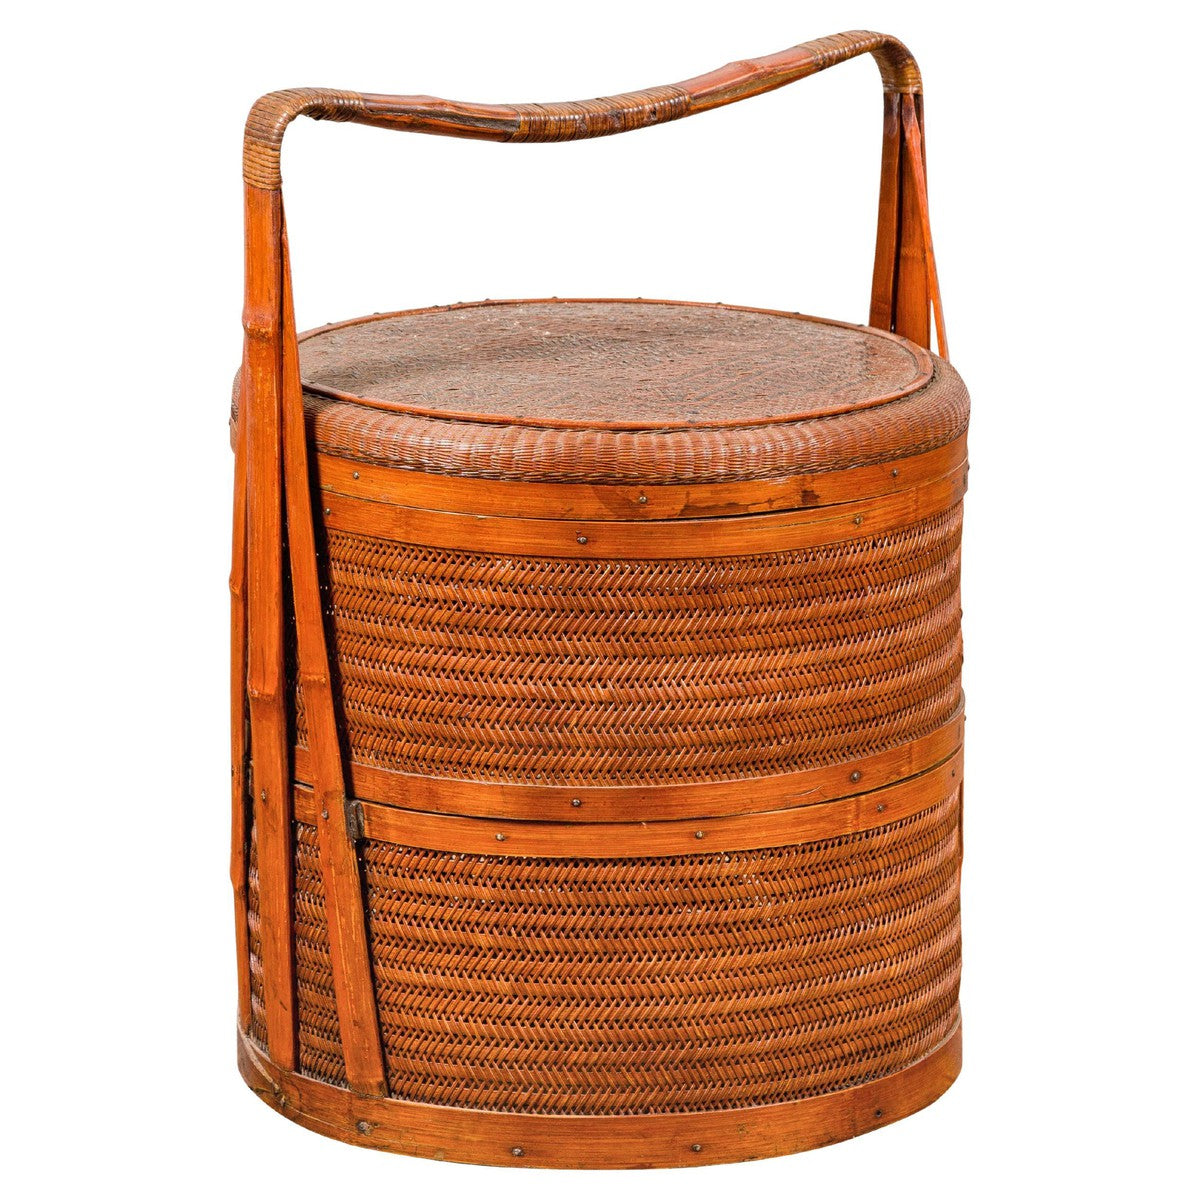 Two-Tiered Bamboo and Rattan Lidded Food Basket with Large Handle-YN7920-1. Asian & Chinese Furniture, Art, Antiques, Vintage Home Décor for sale at FEA Home